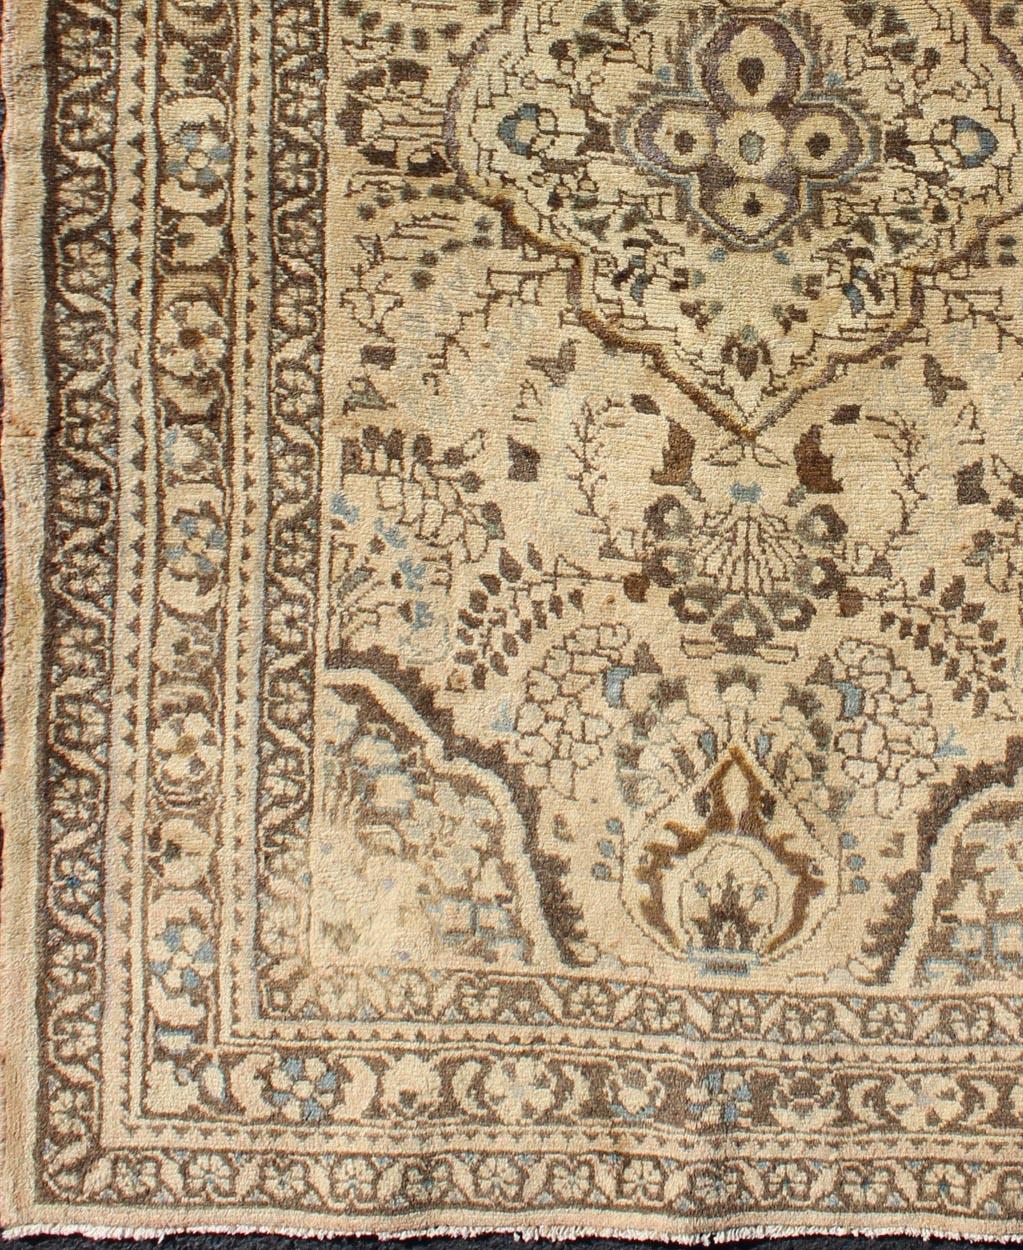 Vintage Persian Lilihan rug with central floral medallion in nude, brown, and taupe, rug h-102-33, country of origin / type: Iran / Lilihan, circa 1950.

This spectacular midcentury Persian Lilihan (circa 1950) bears a magnificent splendor